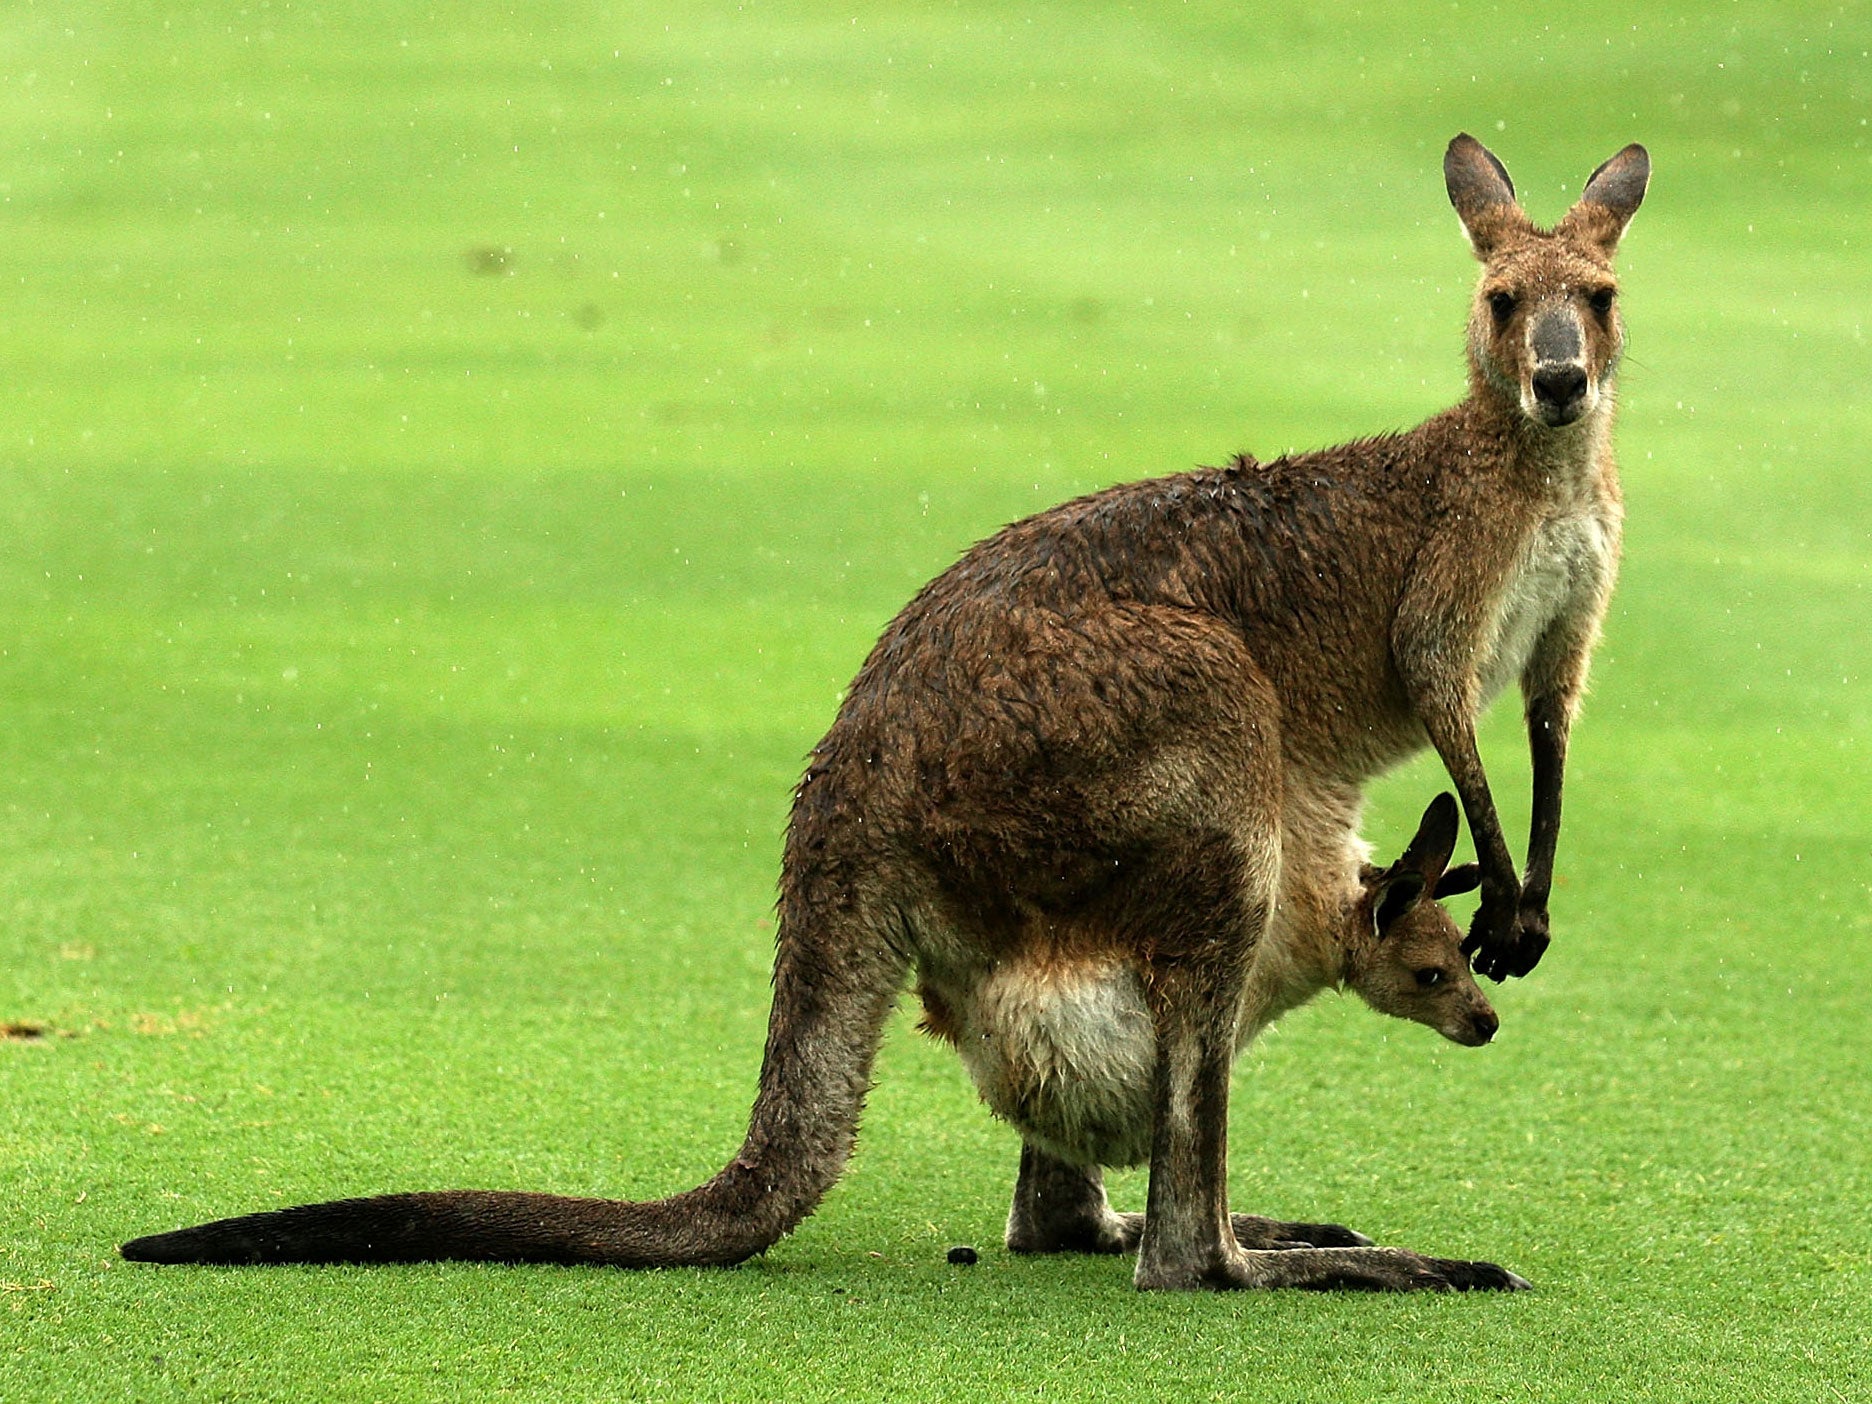 Men film themselves torturing a kangaroo and post the video on Snapchat |  The Independent | The Independent